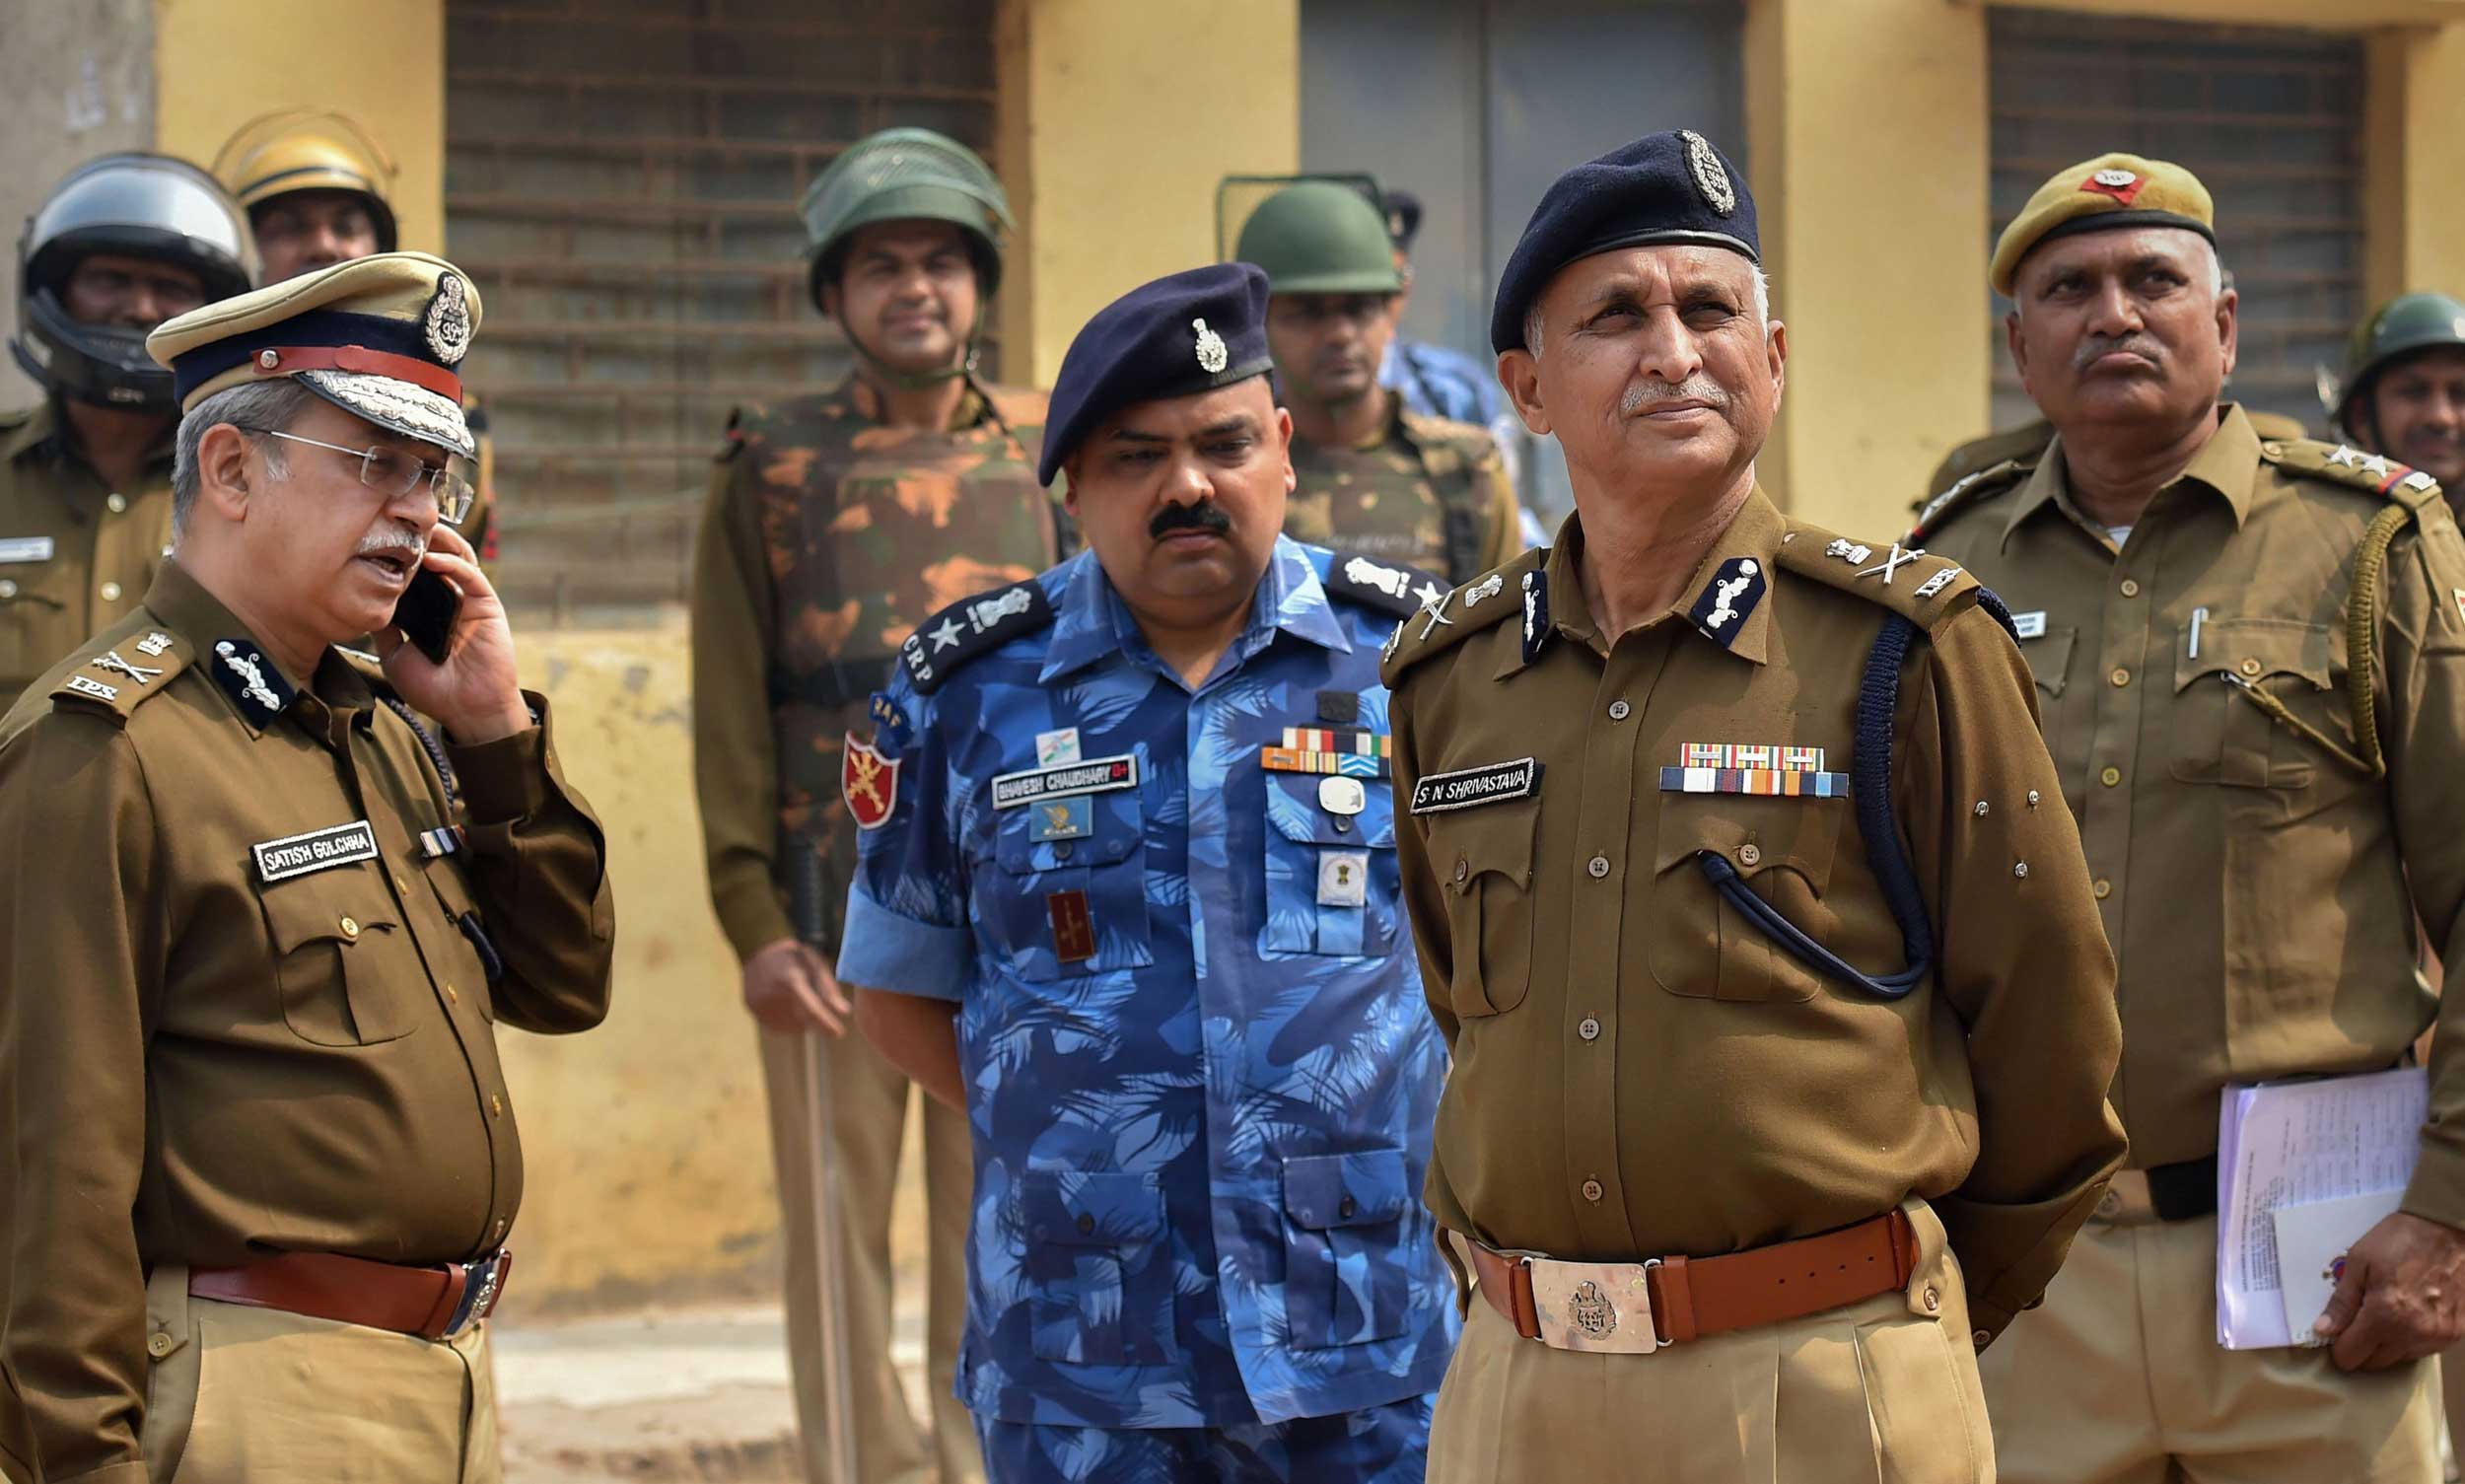 Delhi police commissioner S.N. Srivastava and Delhi police special commissioner (crime) Satish Golcha inspect Johar area of the riot-affected in northeast Delhi on Wednesday.